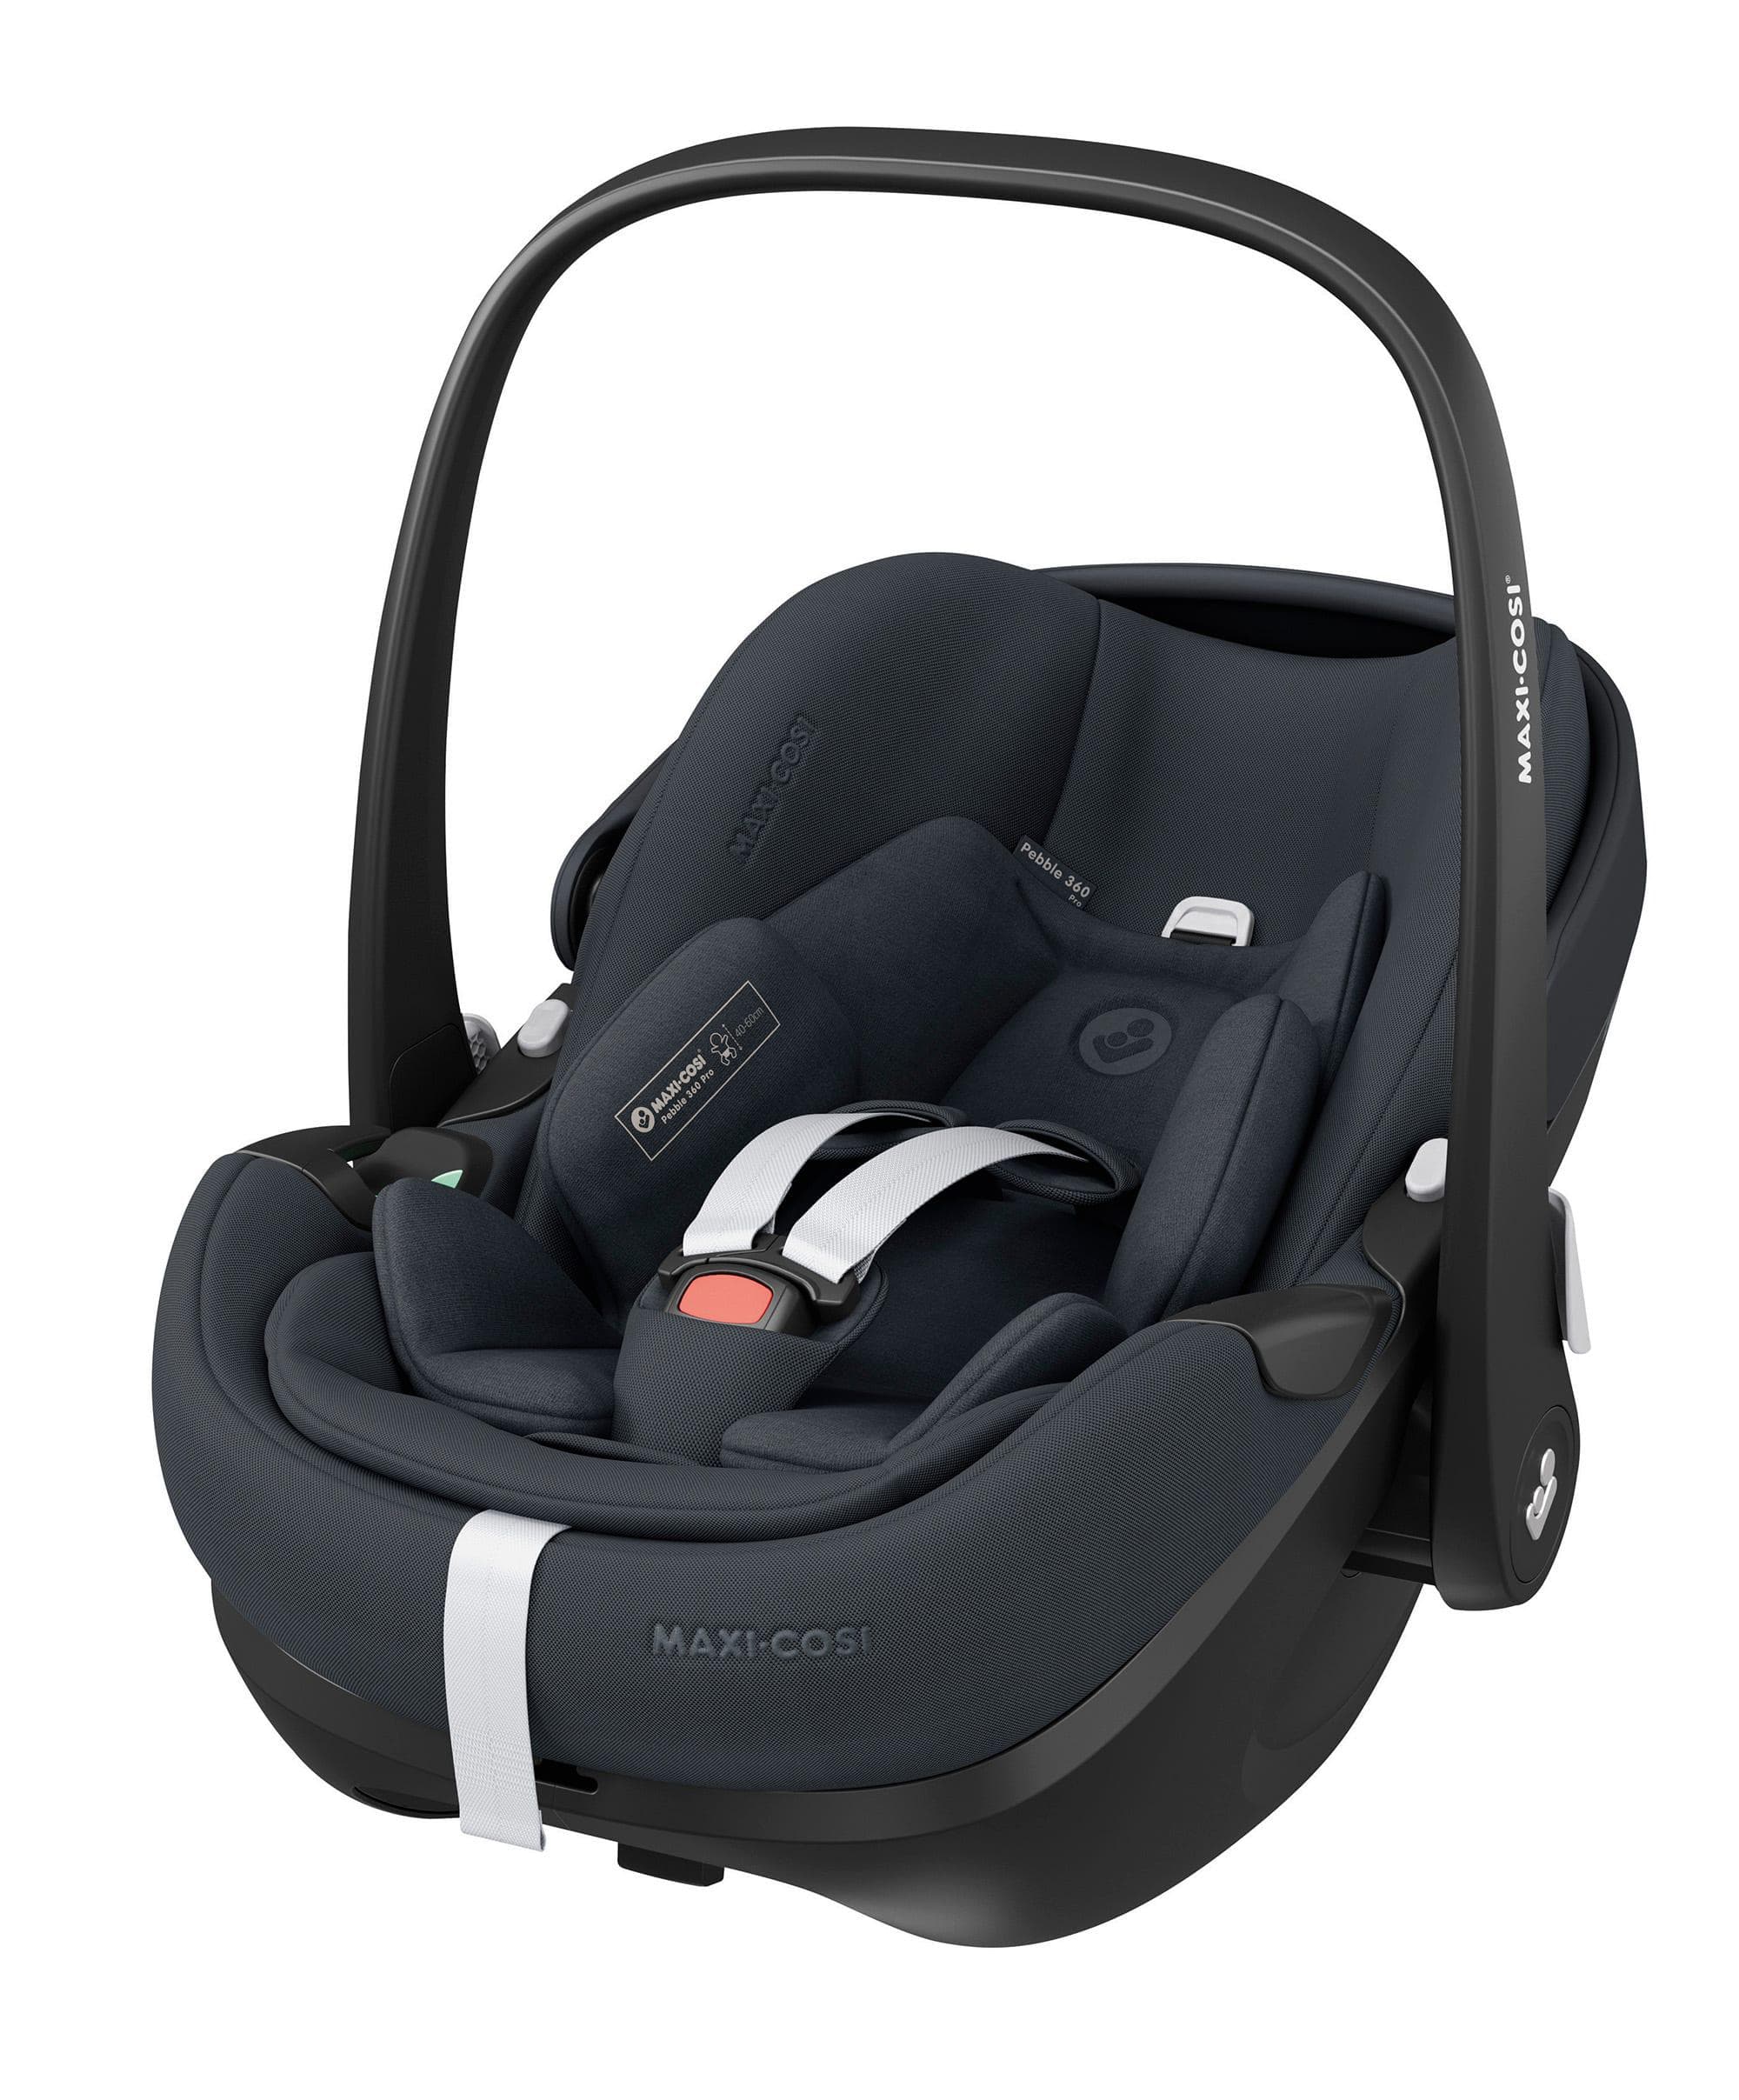 Uber and Car Seats: Can You Uber With a Baby?